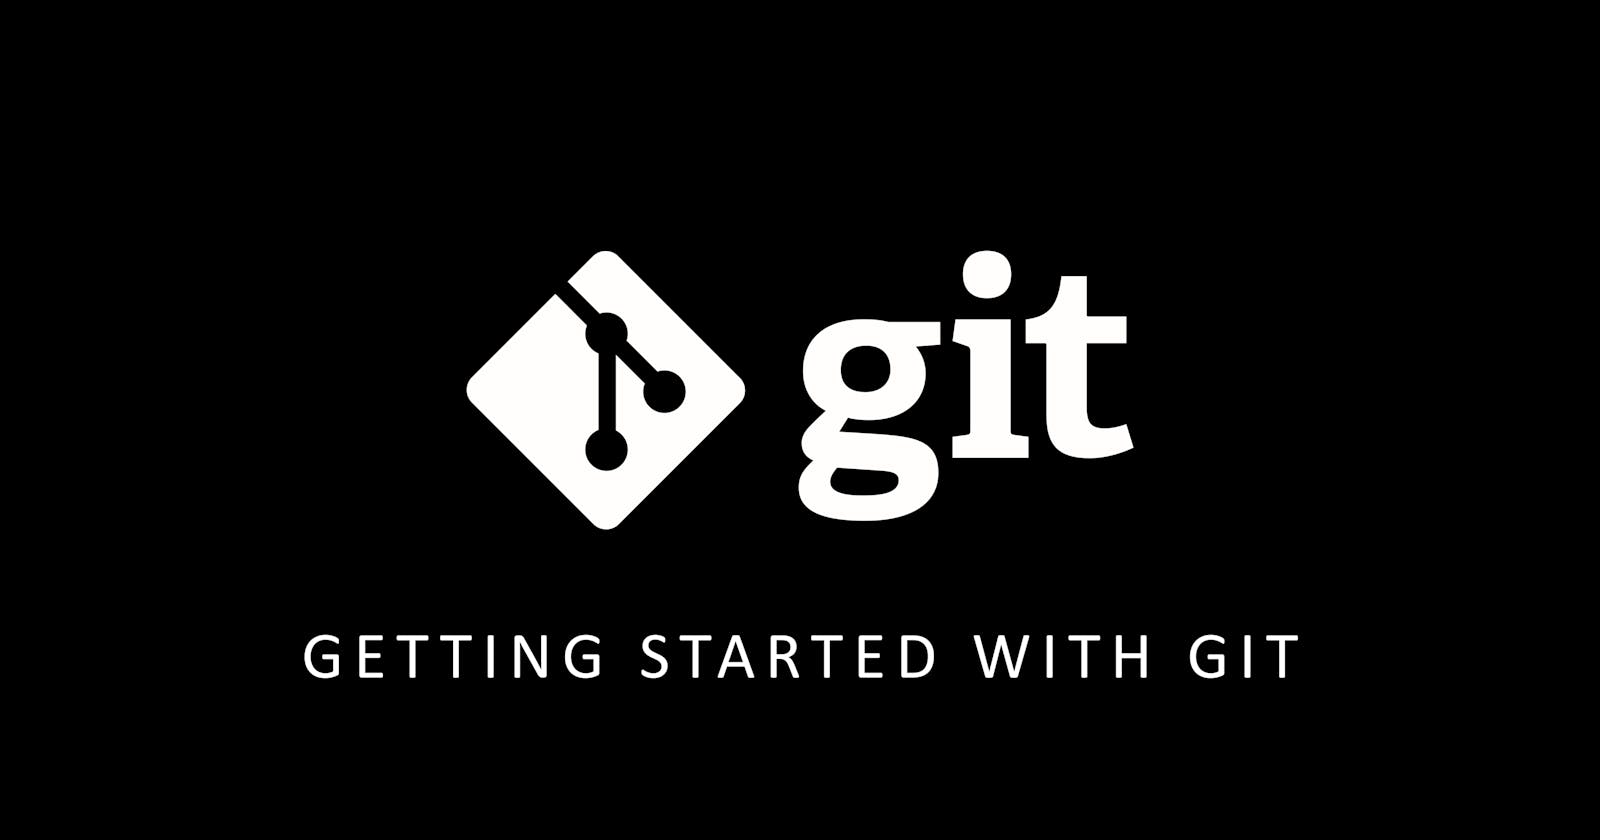 GET STARTED WITH GIT